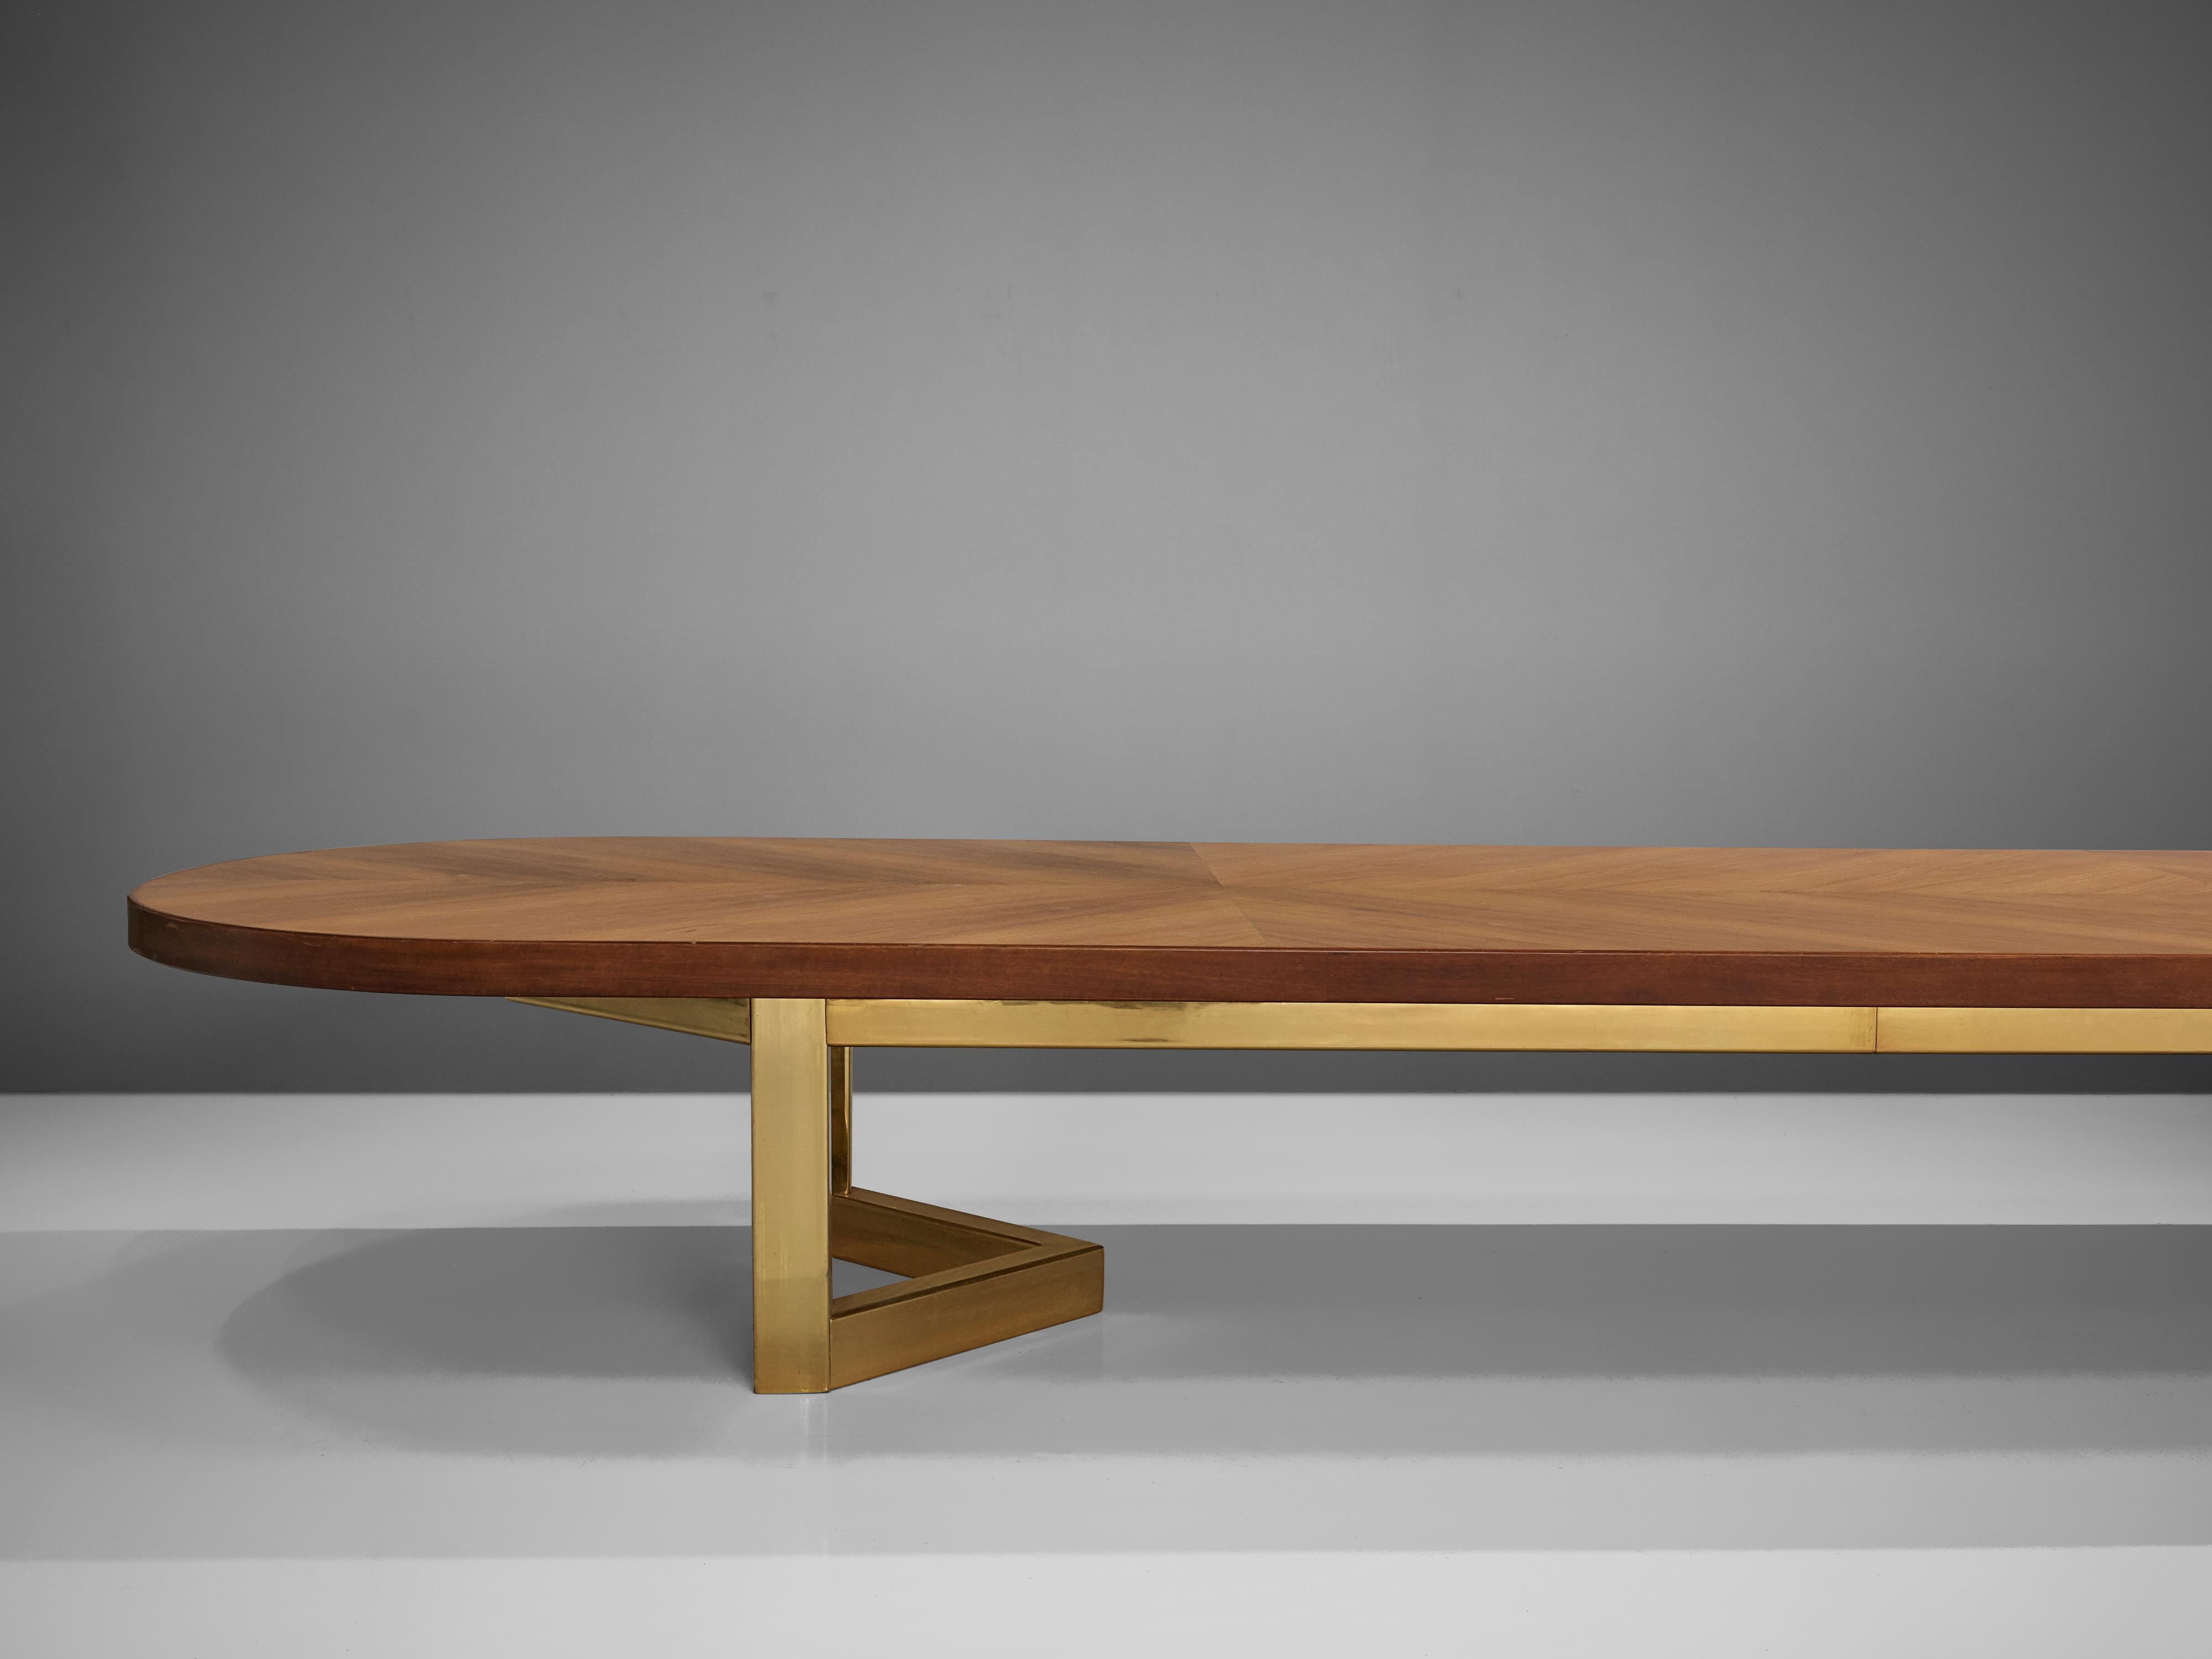 Large Conference Table in Walnut and Brass 7, 20 M / 23, 6 Ft Long 1